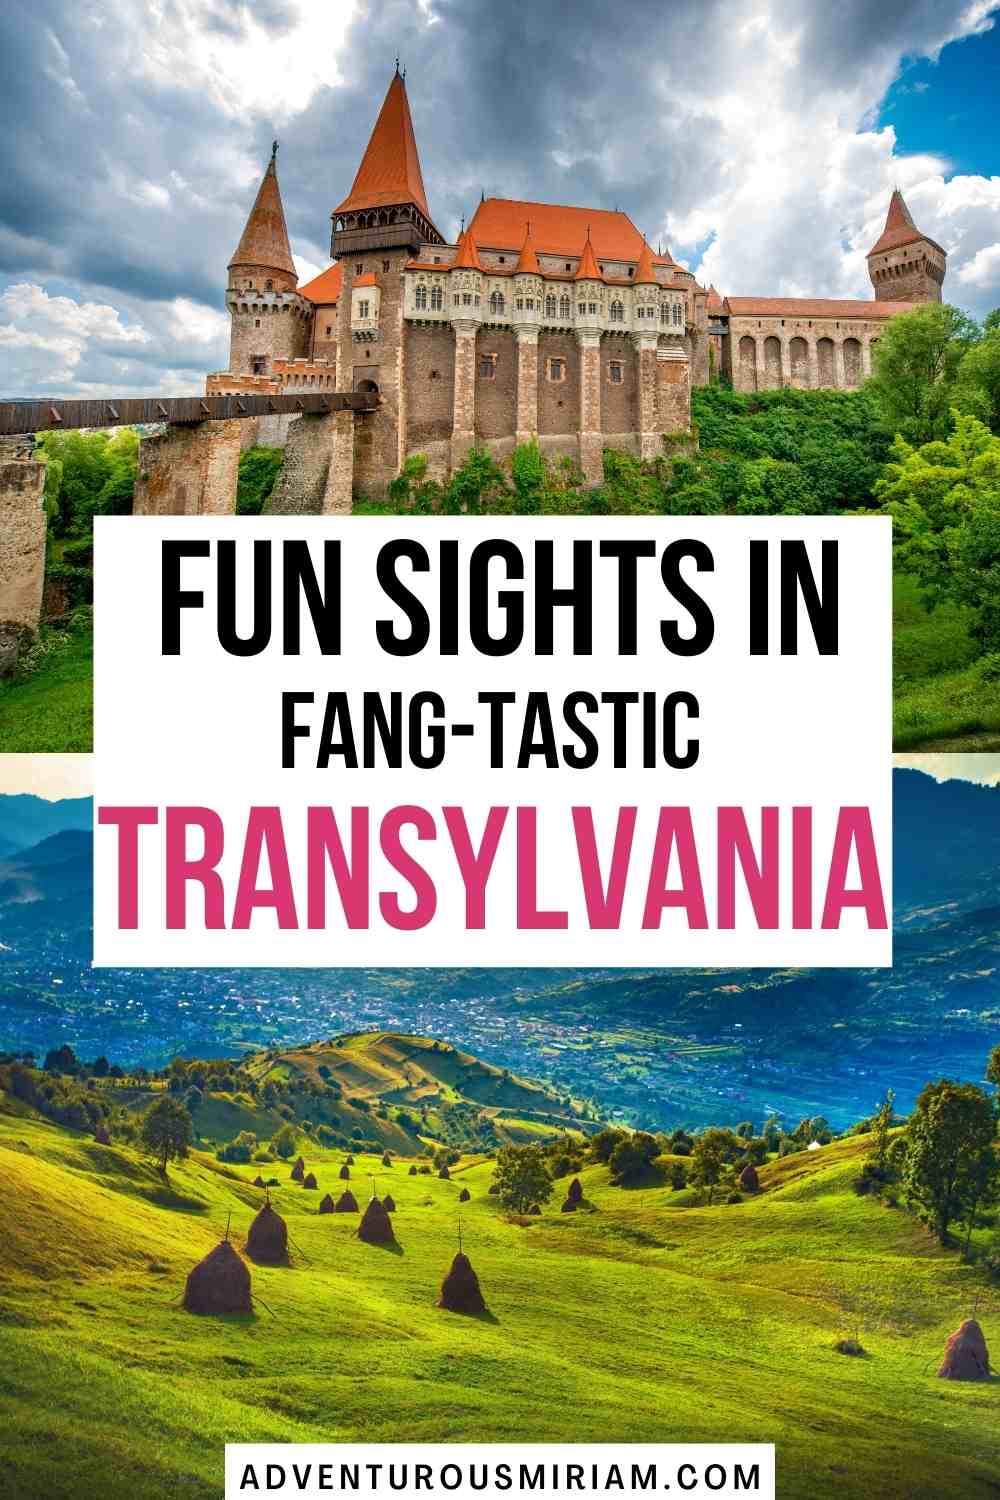 You might picture Transylvania filled with dark mountains, creepy castles and forests crawling with menacing werewolves and flapping bats. Do you want the real version, though? Here's a guide to Dracula's homeland: Transylvania, Romania.